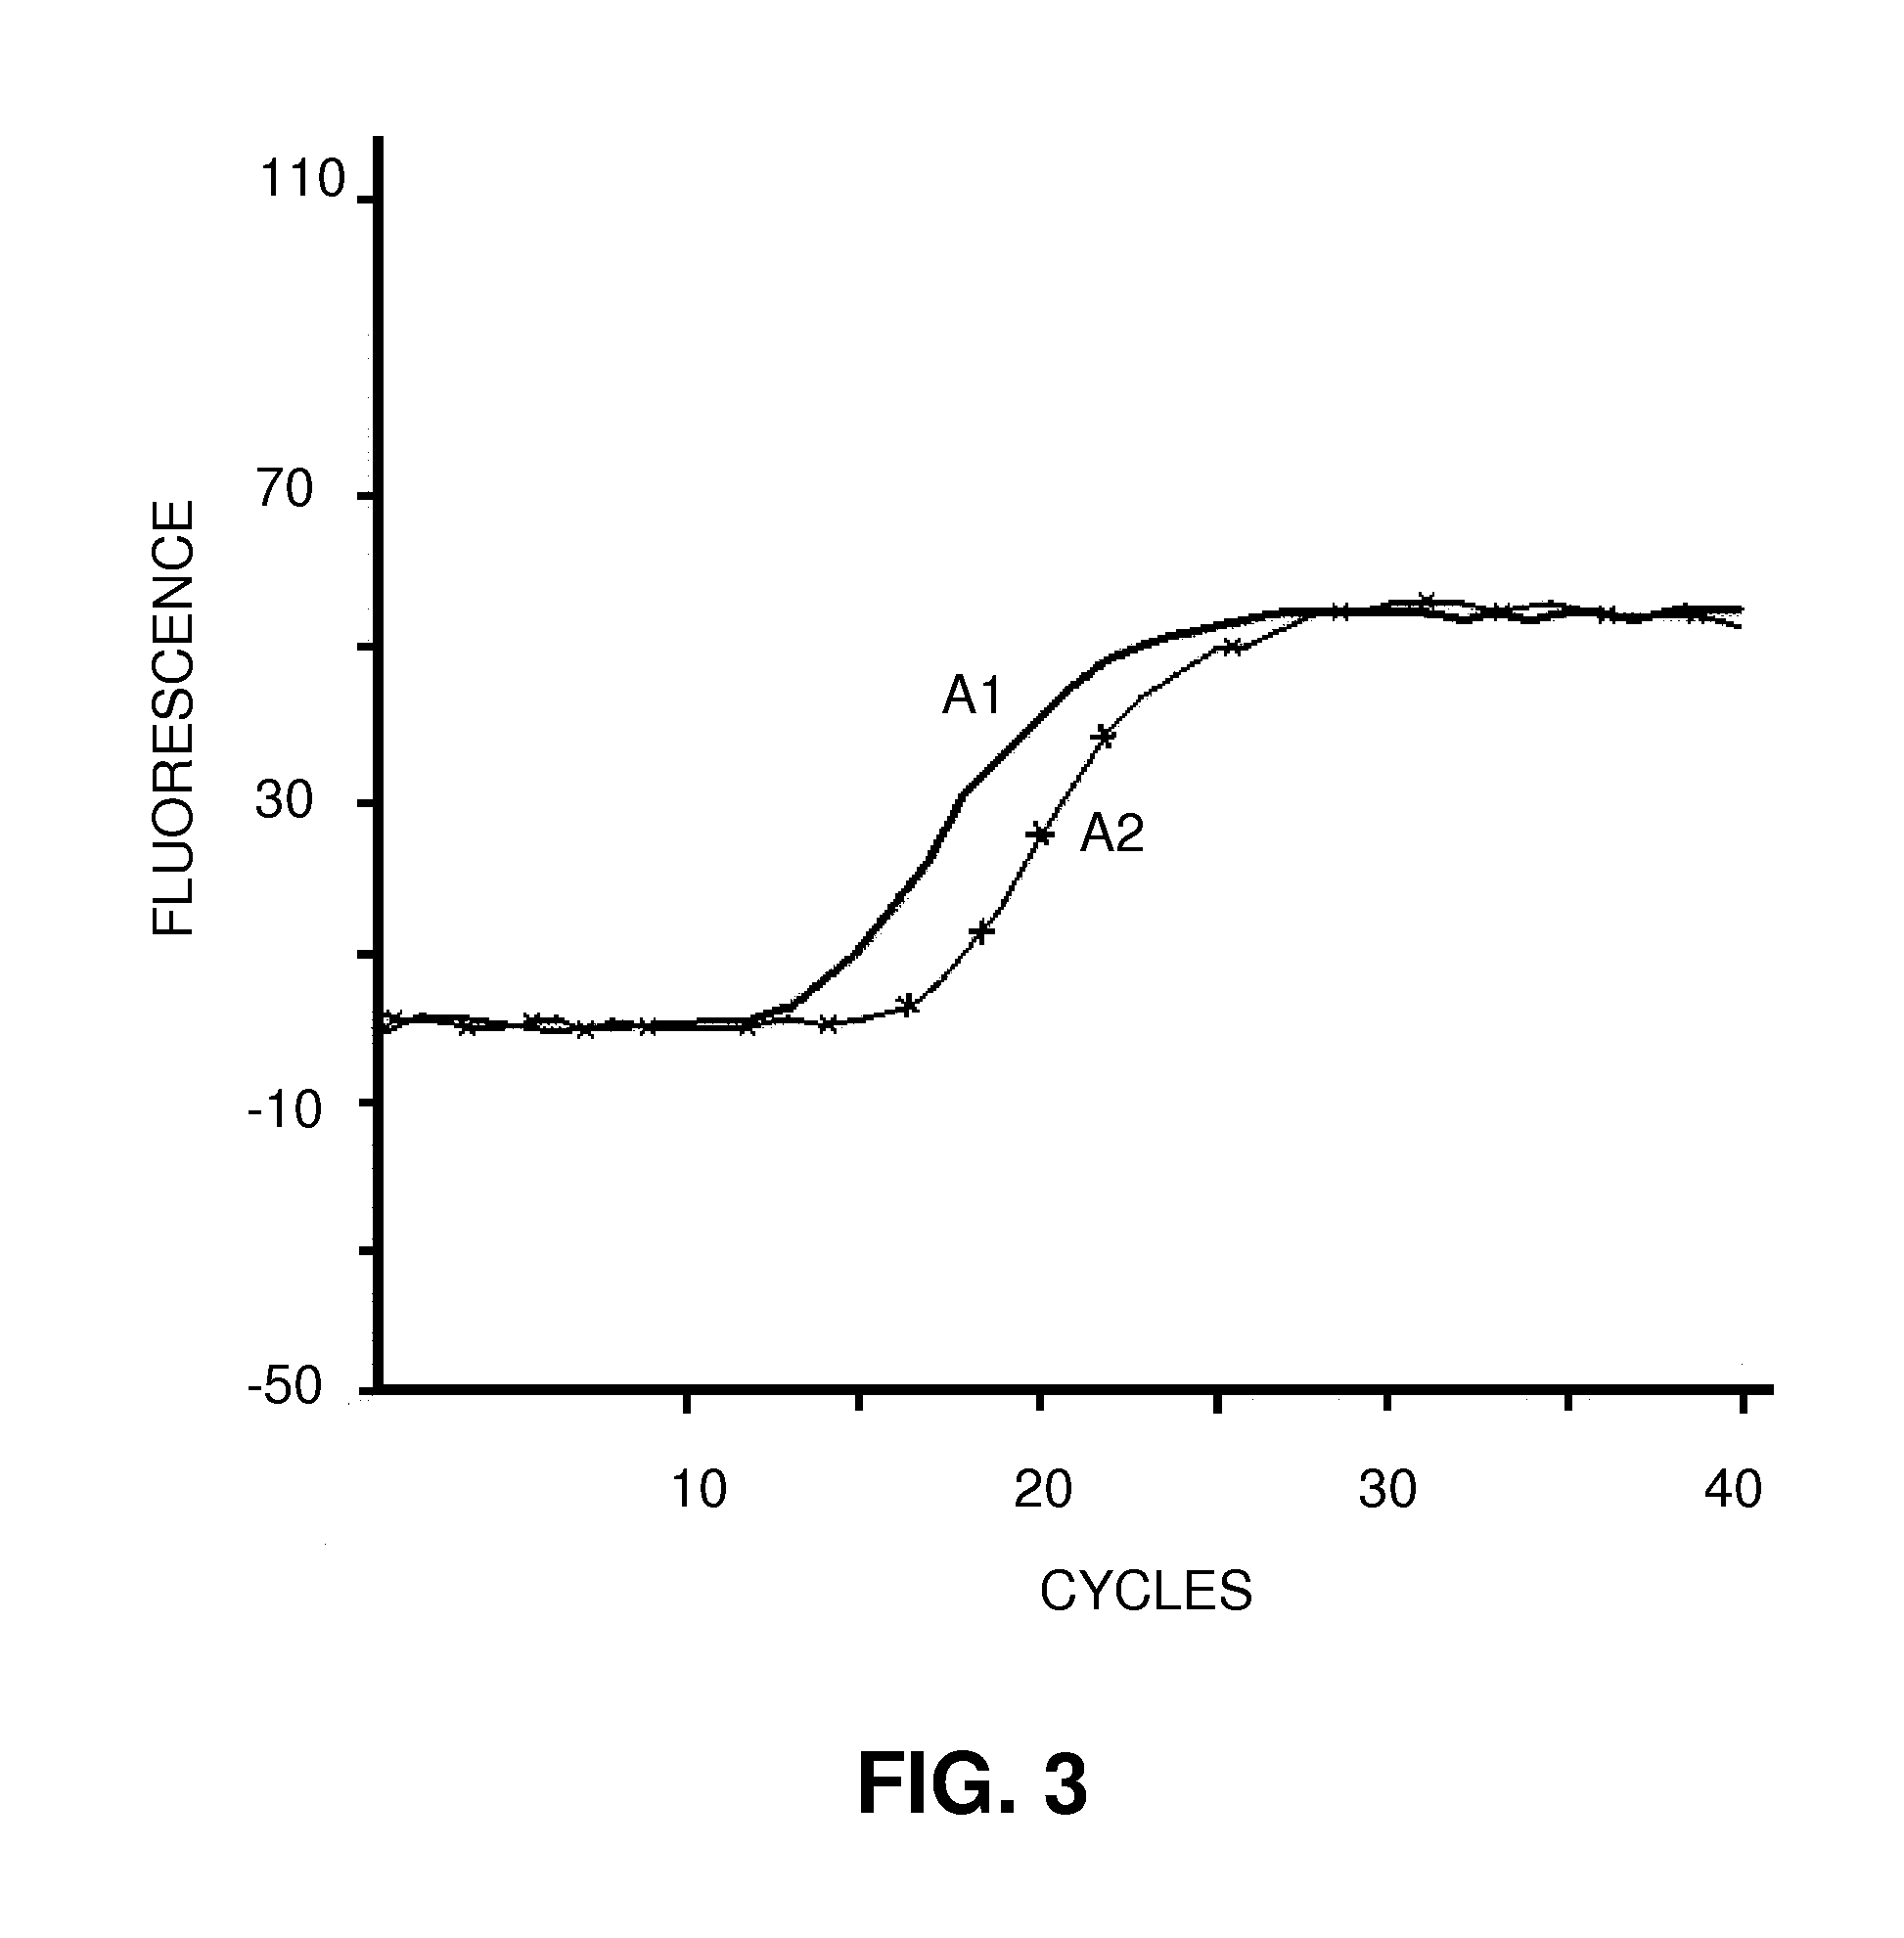 Method for detection and multiple, simultaneous quantification of pathogens by means of real-time polymerase chain reaction